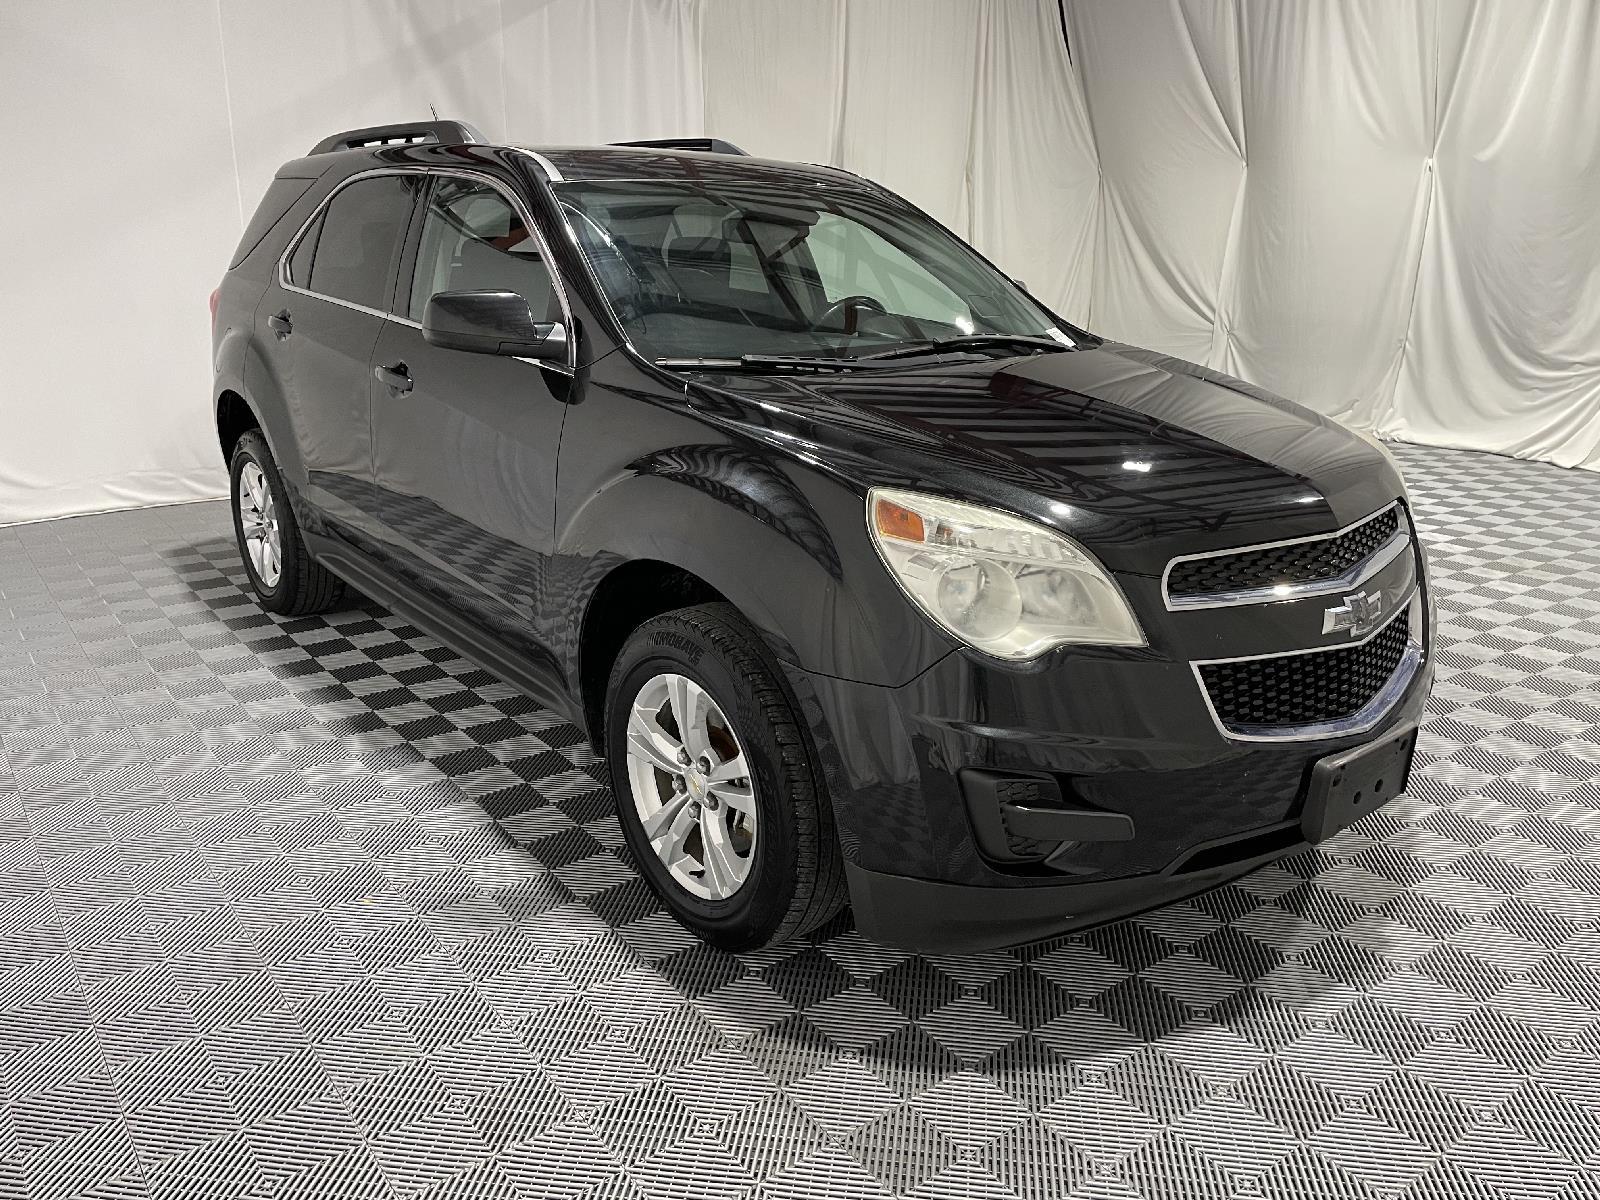 Used 2014 Chevrolet Equinox LT SUV for sale in St Joseph MO